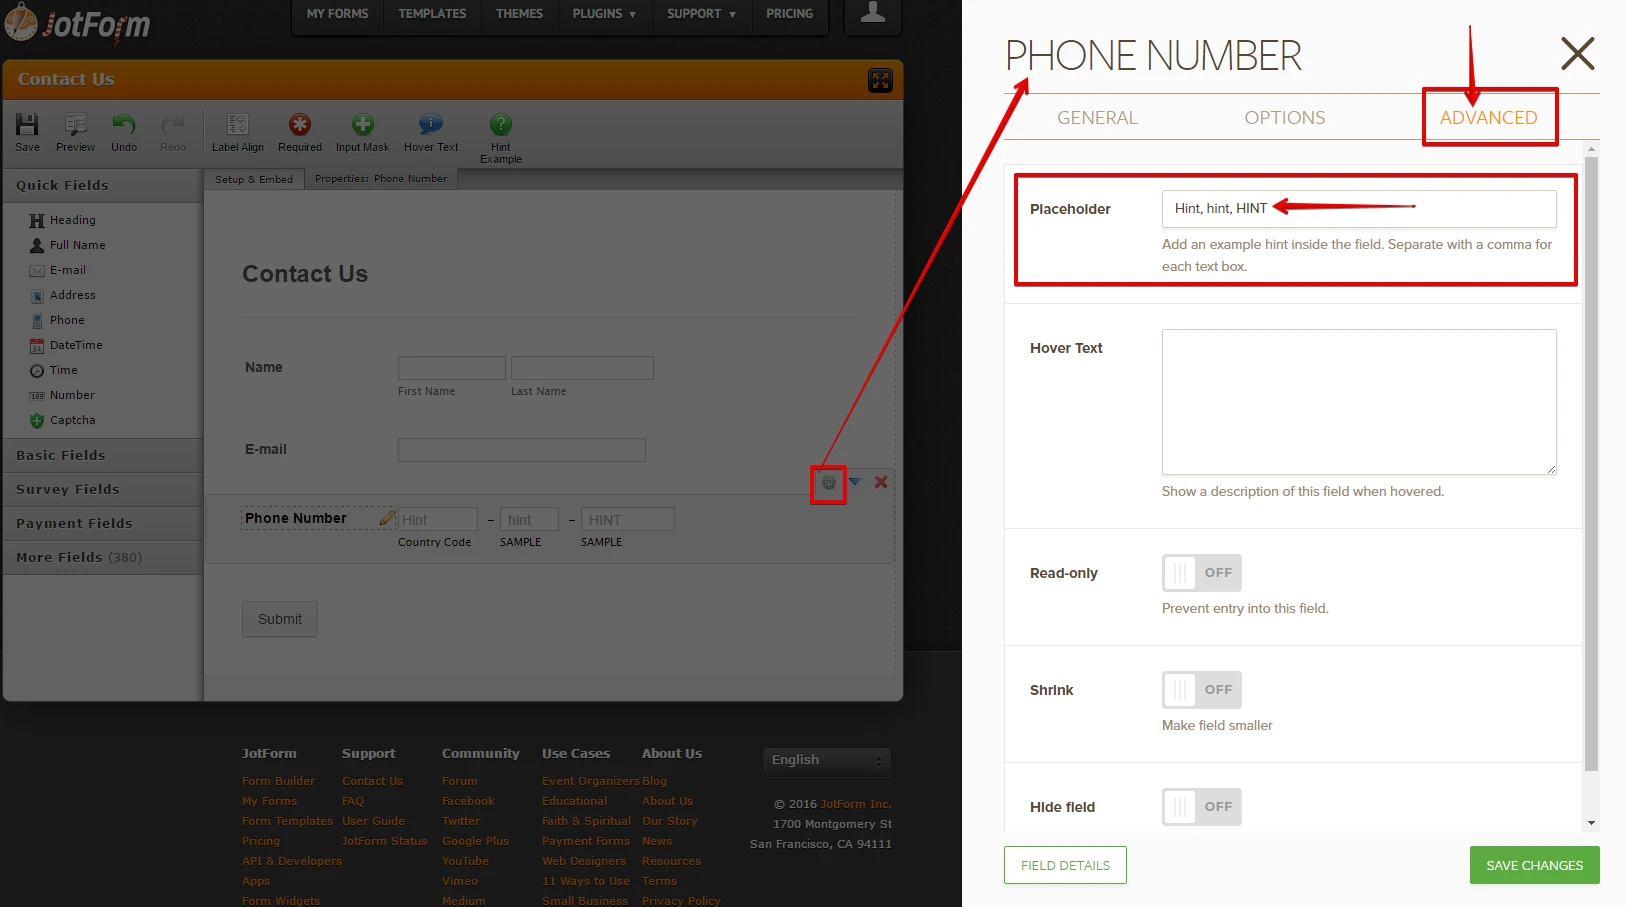 Please add an extension option for the phone number field Image 3 Screenshot 62